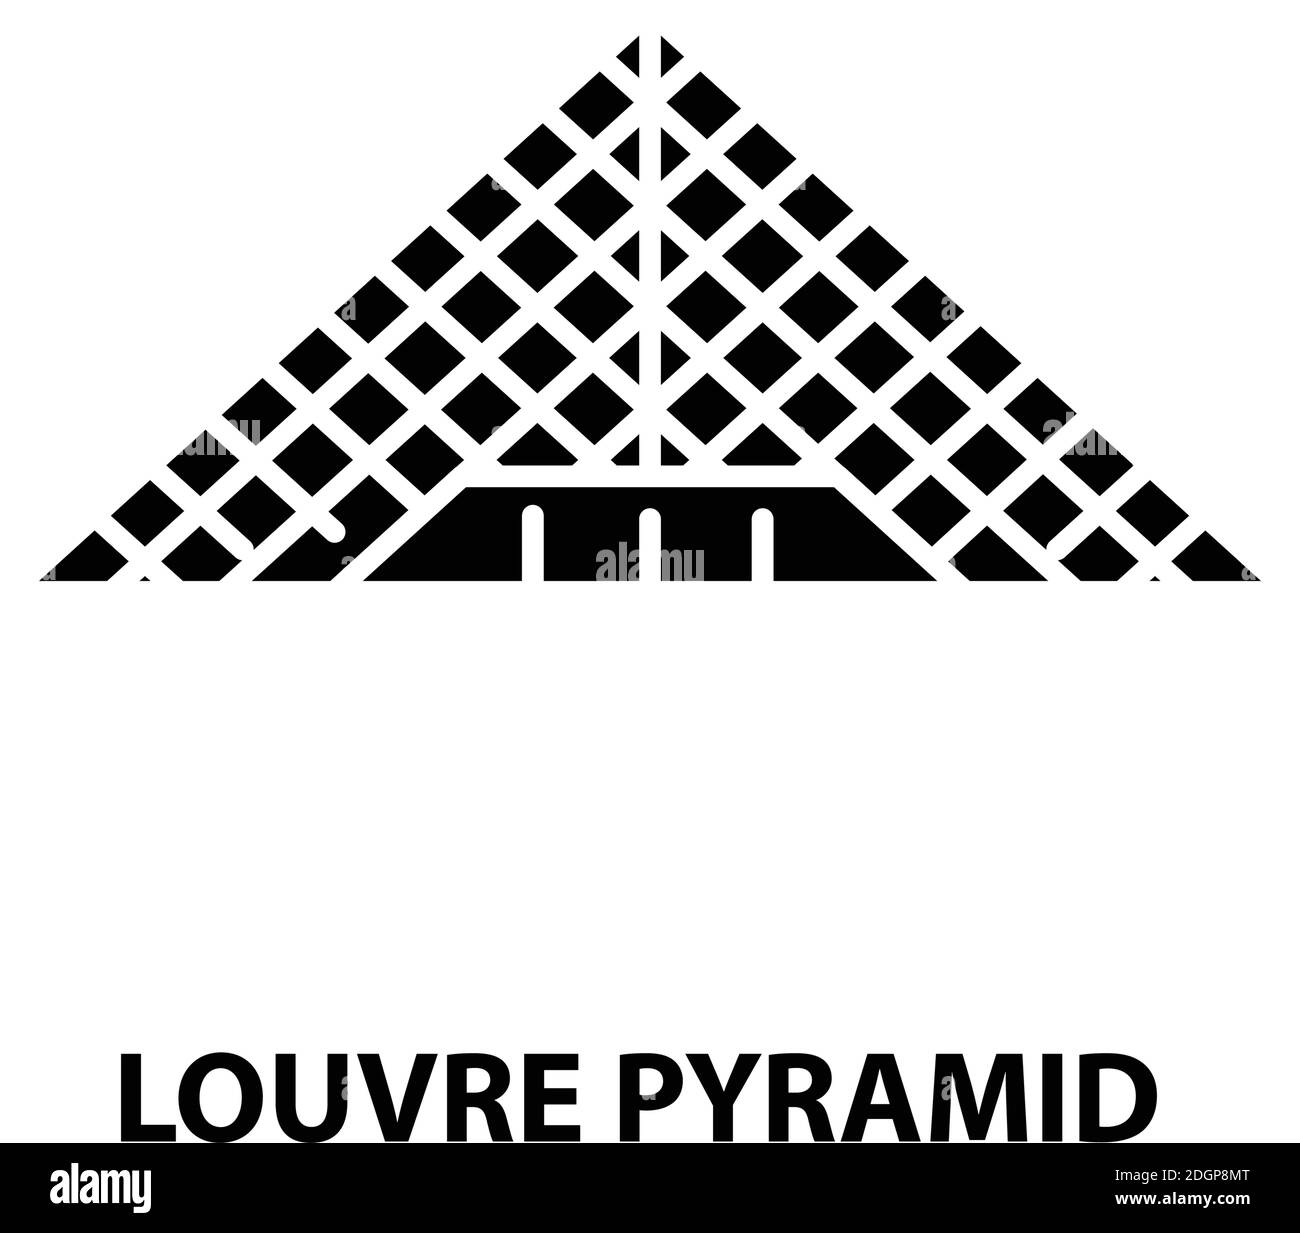 louvre pyramid icon, black vector sign with editable strokes, concept illustration Stock Vector